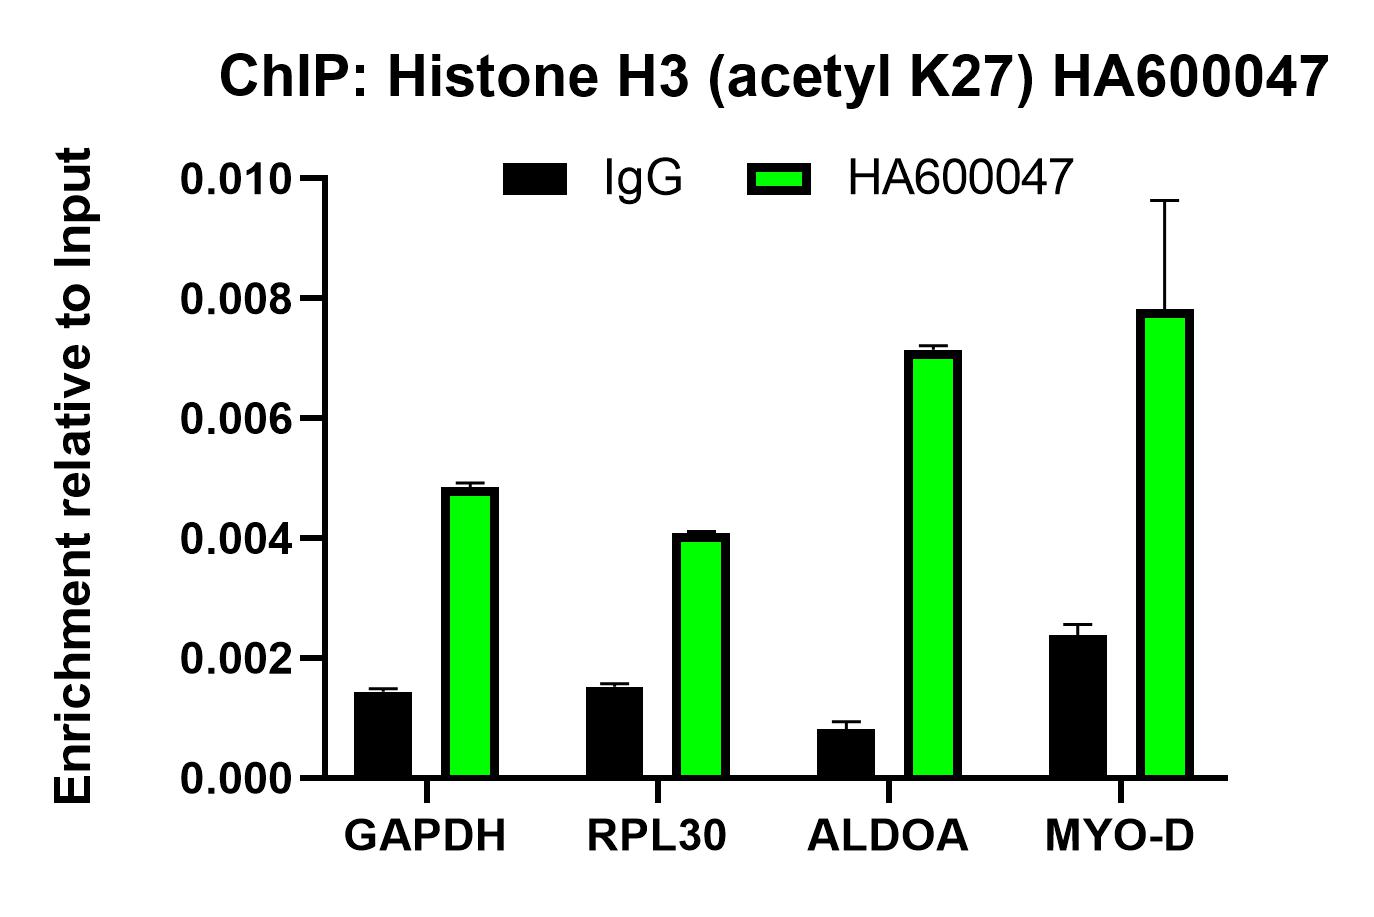 Chromatin immunoprecipitations were performed with cross-linked chromatin from HeLa cells treated with 500ng/mL TSA for 4 hours and either Histone H3 (acetyl K27) (HA600047) or Normal Mouse IgG according to the ChIP protocol. The enriched DNA was quantified by real-time PCR using indicated primers. The amount of immunoprecipitated DNA in each sample is represented as signal relative to the total amount of input chromatin, which is equivalent to one.